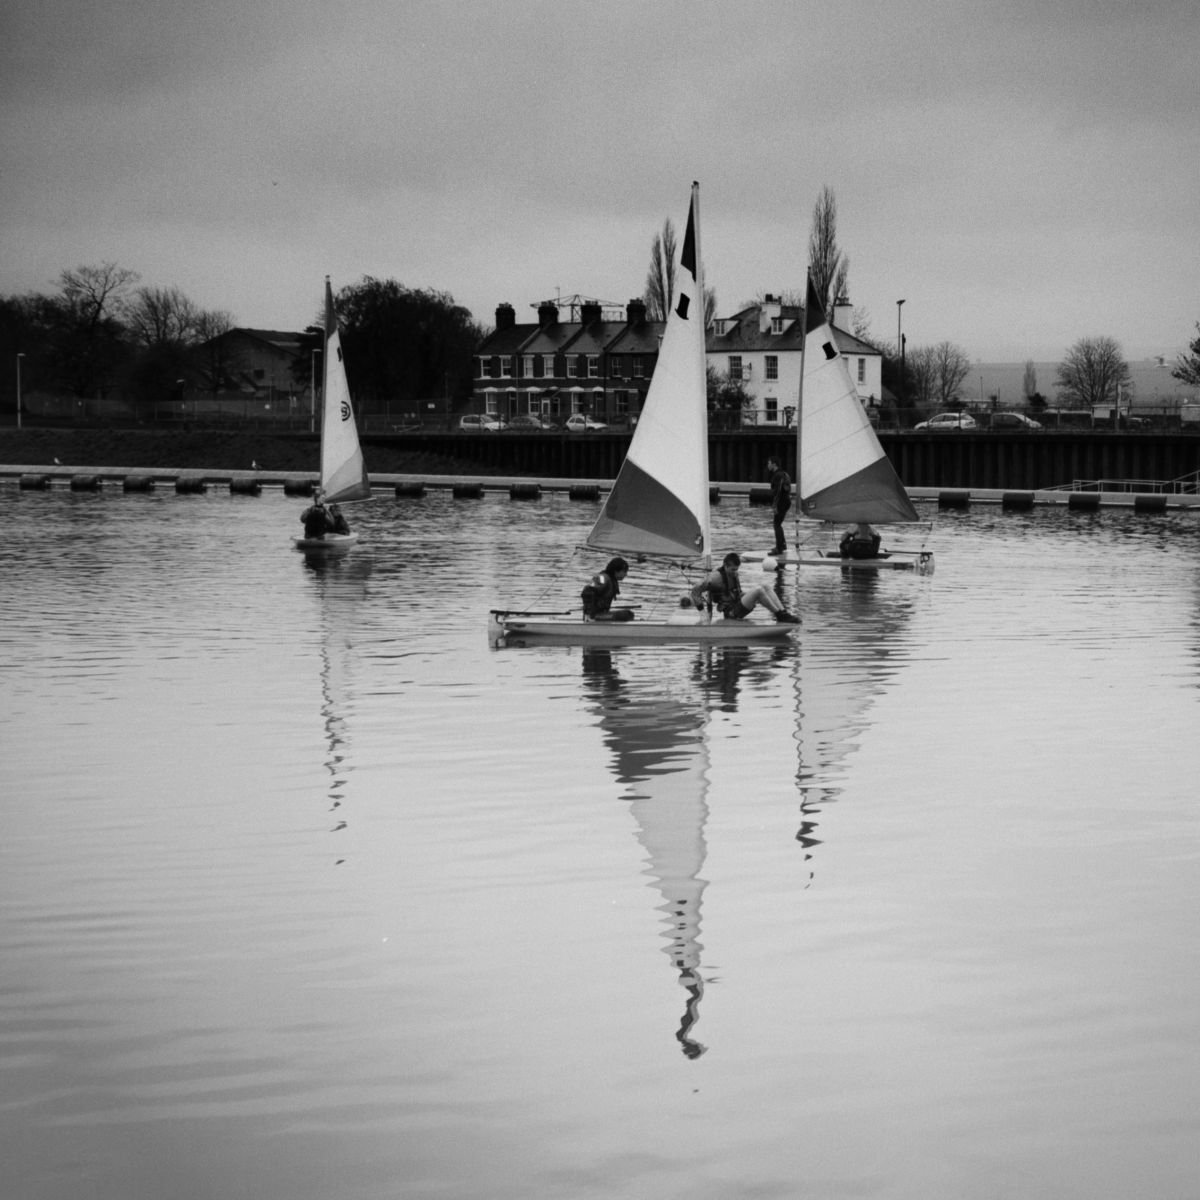 Sailing Lessons by John Rochester